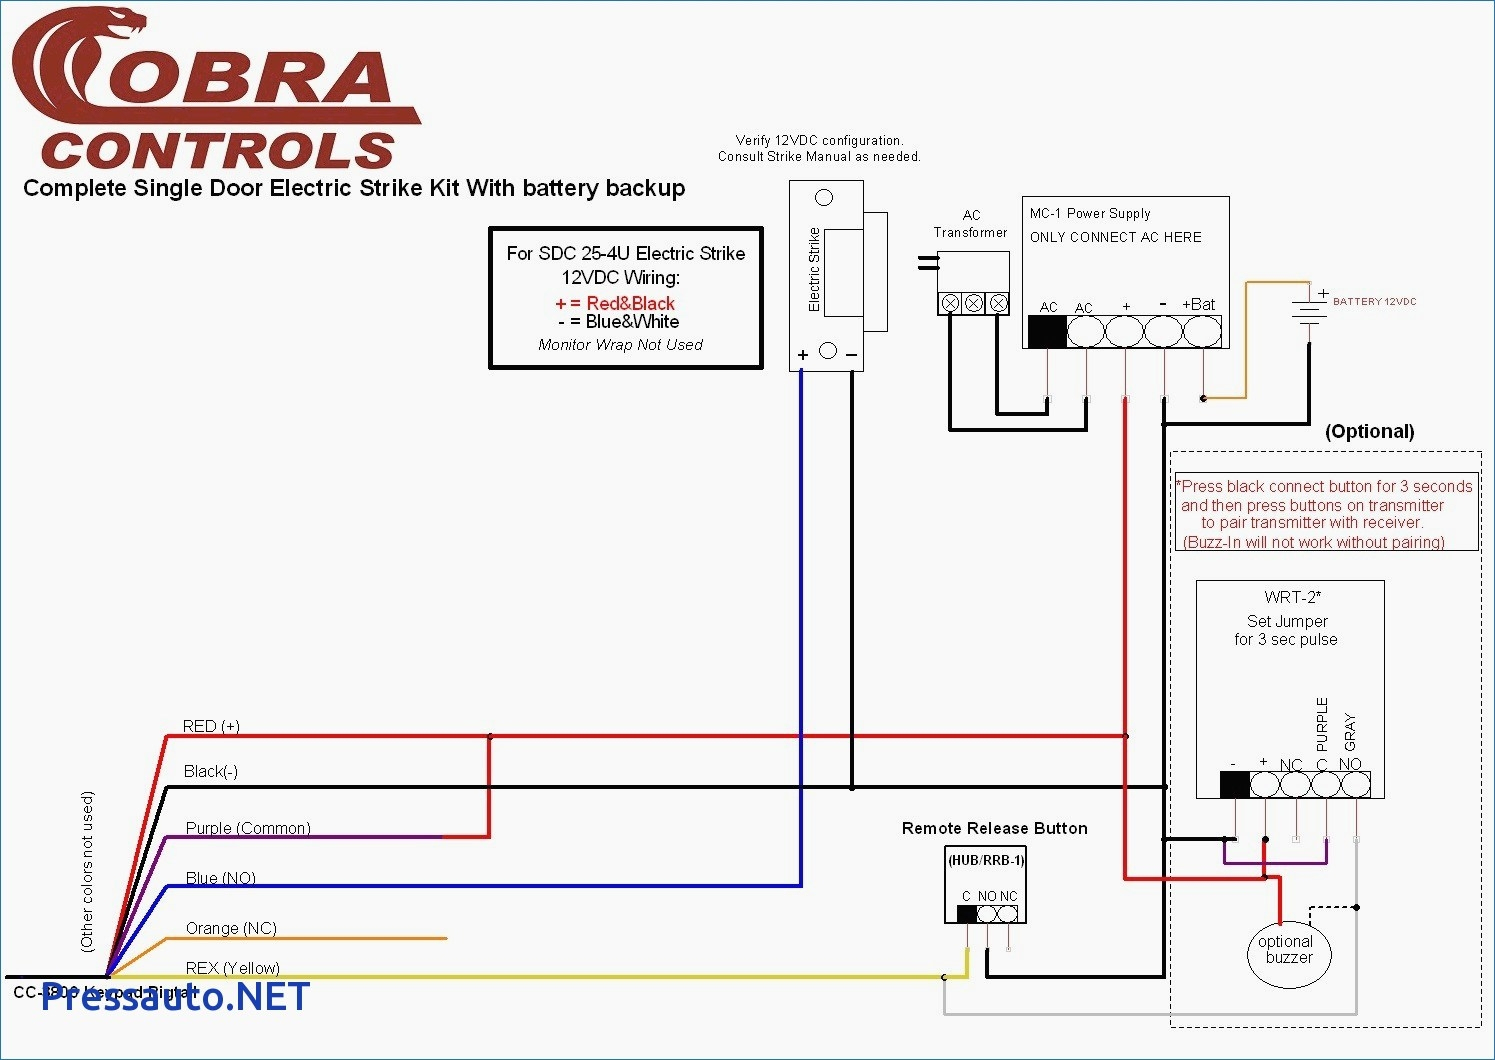 Wiring Diagram For Intercom System - Wiring Diagrams Hubs - Home Theater Wiring Diagram